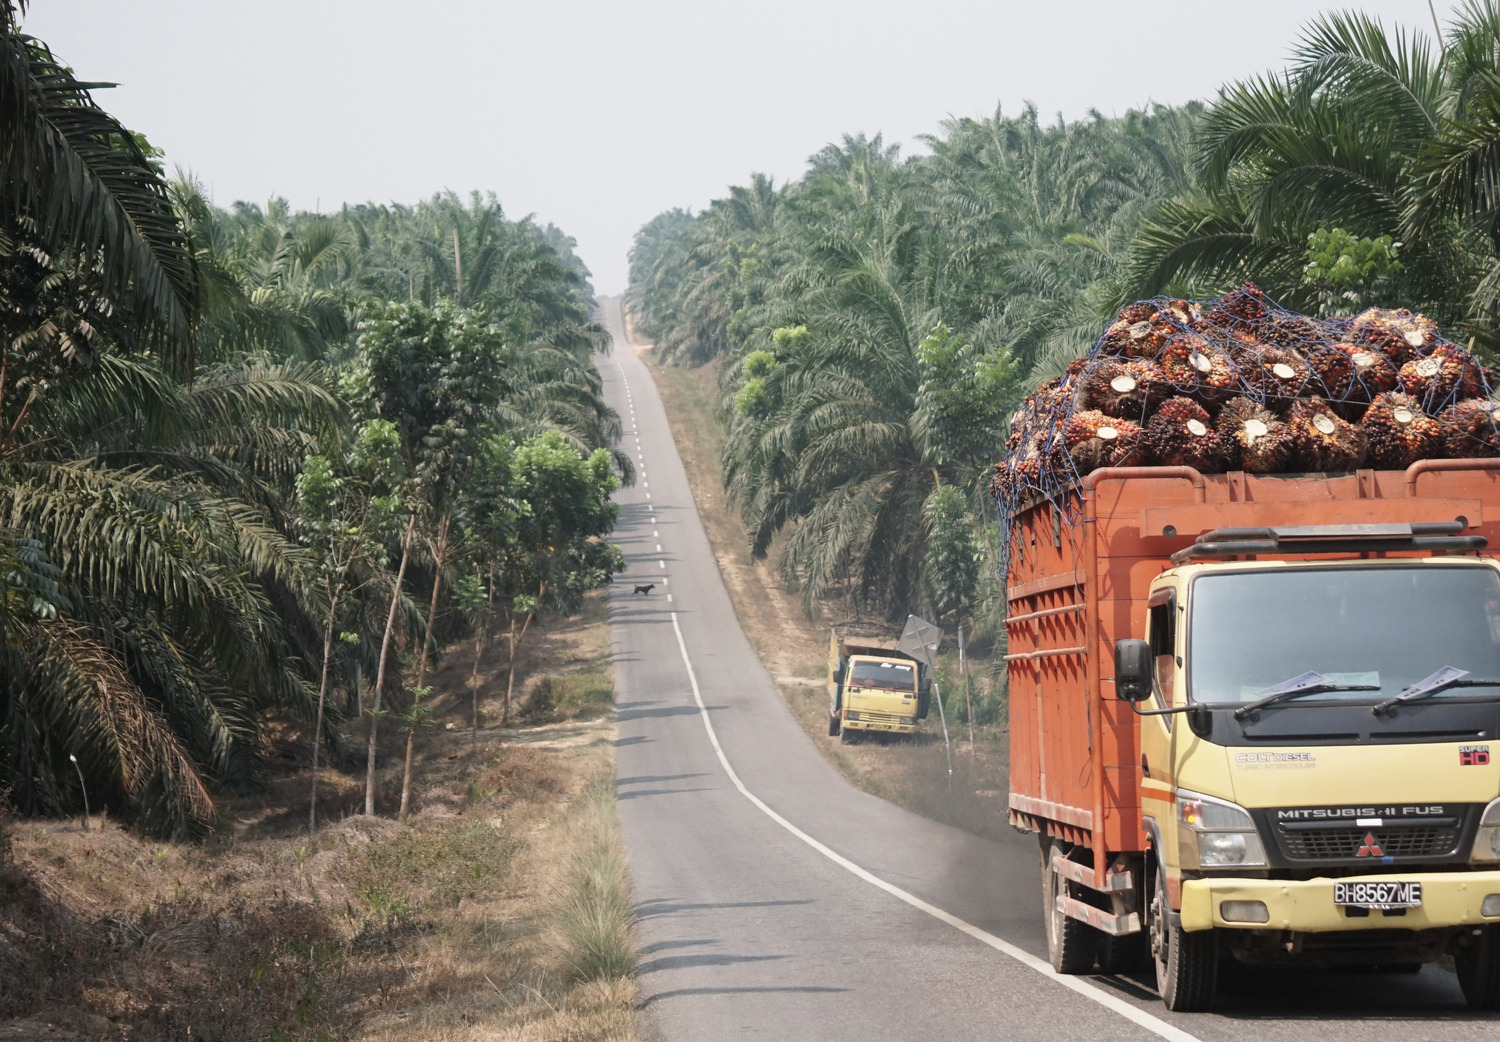 Truck loaded with oil palm fruit bunches, driving through oil palm tree plantation in Jambi province, Sumatra (Indonesia)